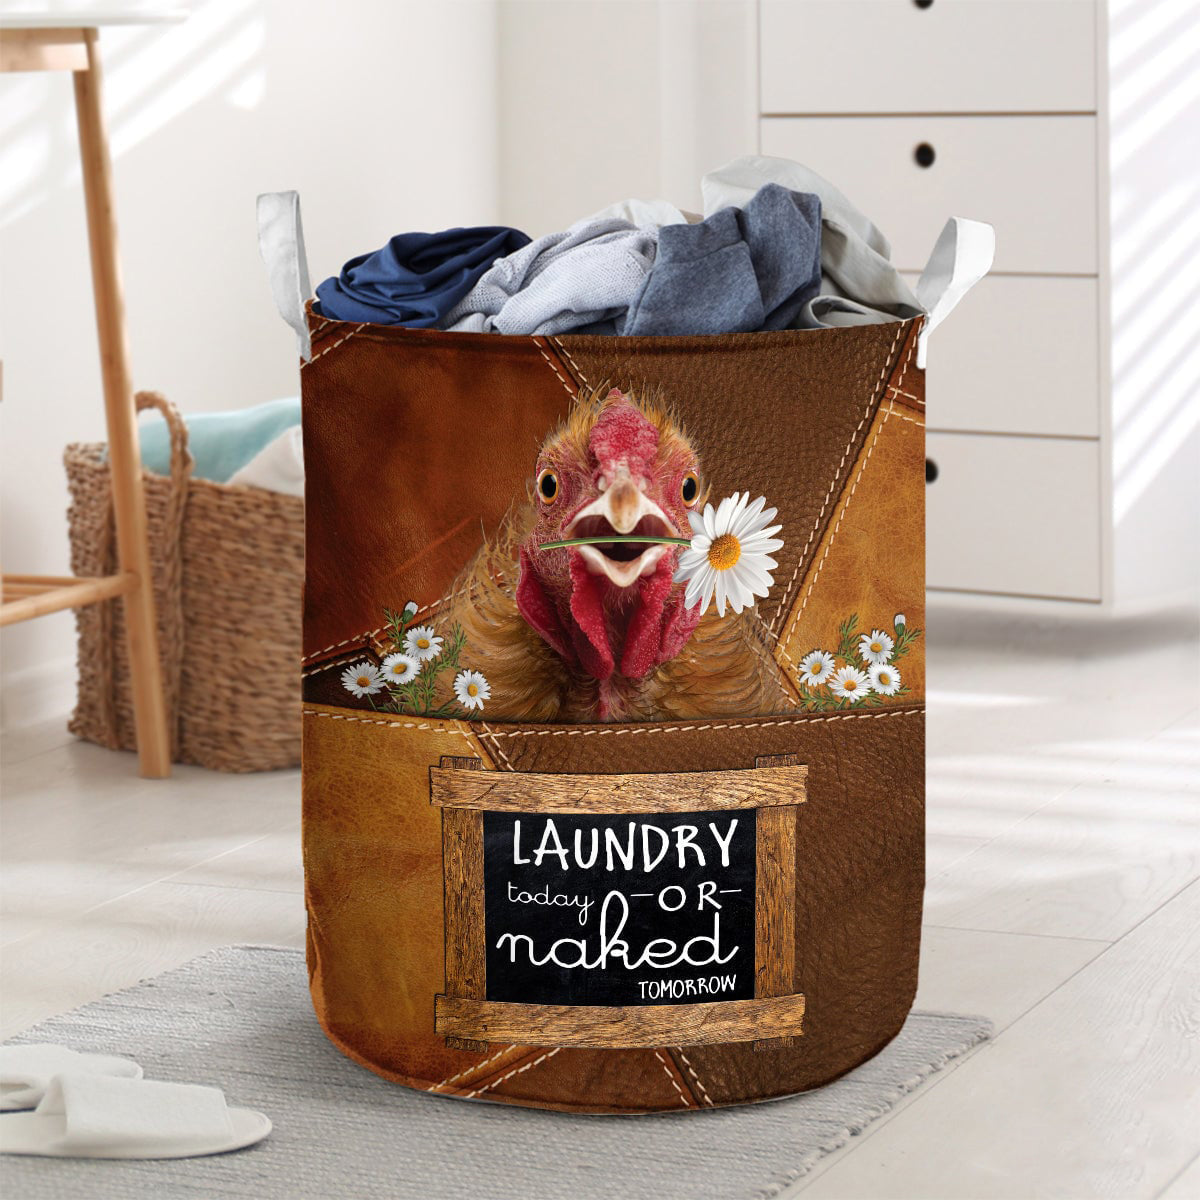 Chicken-laundry today or naked tomorrow laundry basket